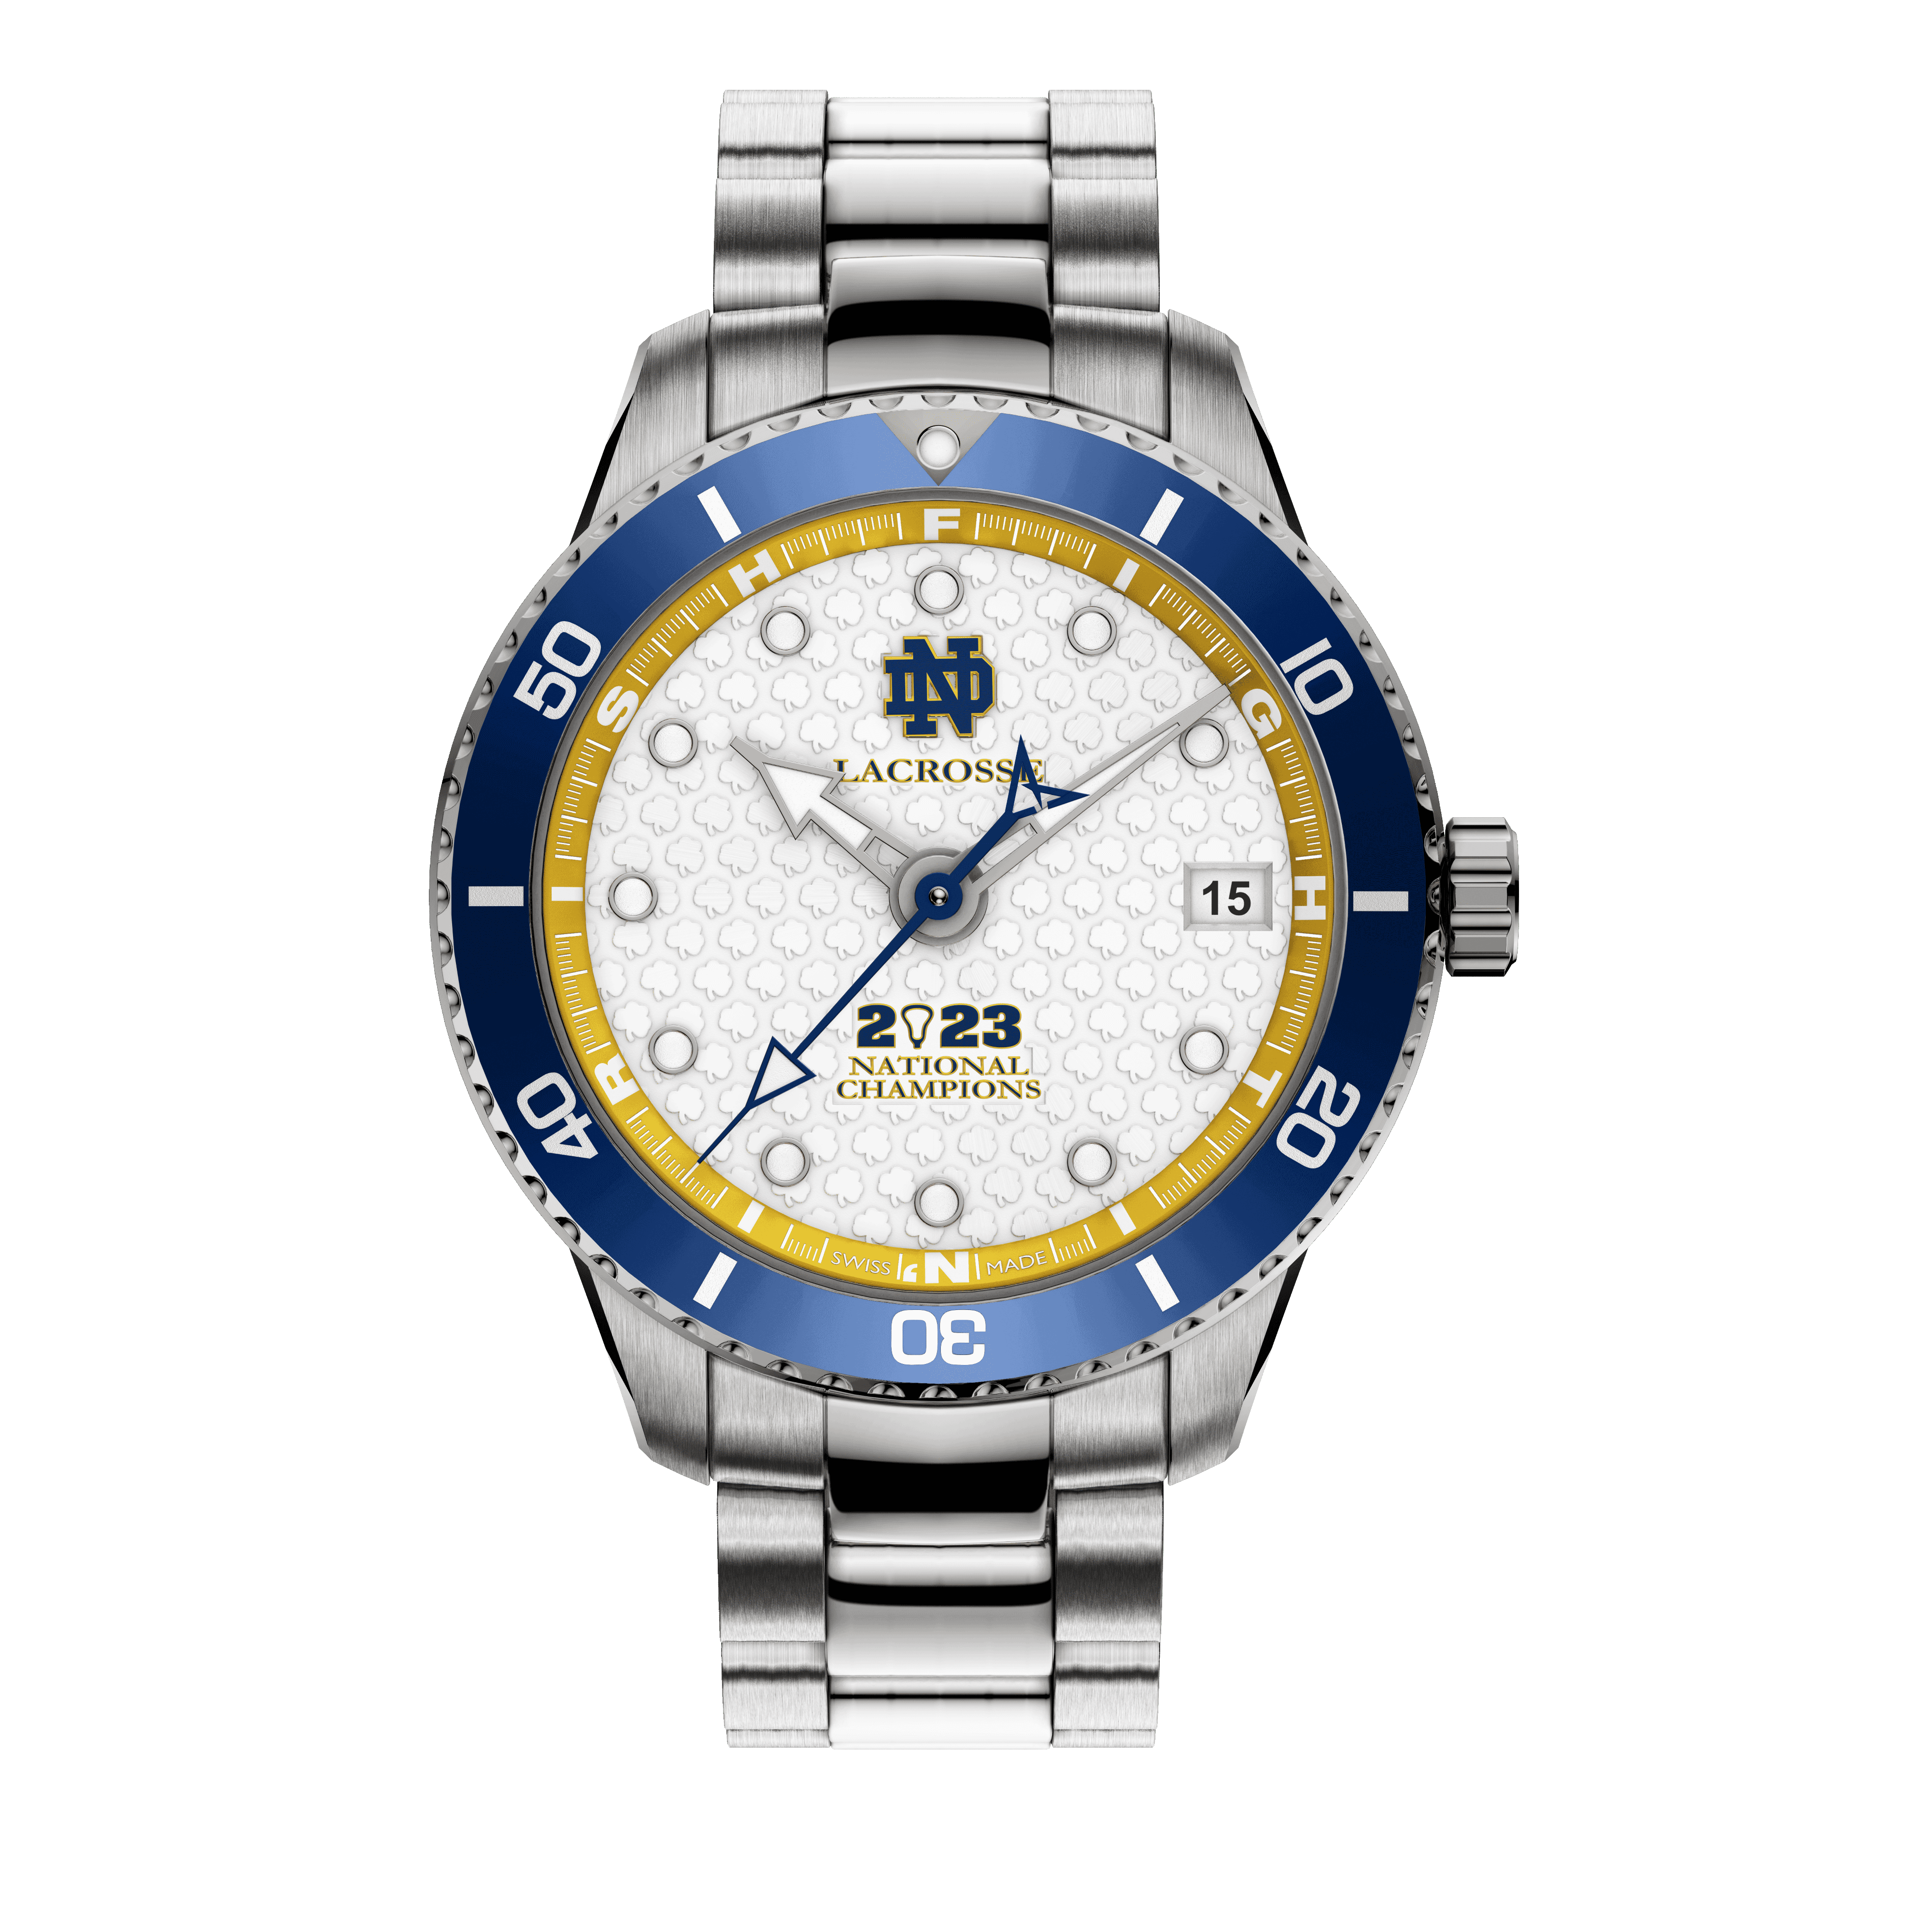 Notre Dame Lacrosse 2023 Champions swiss made automatic watch